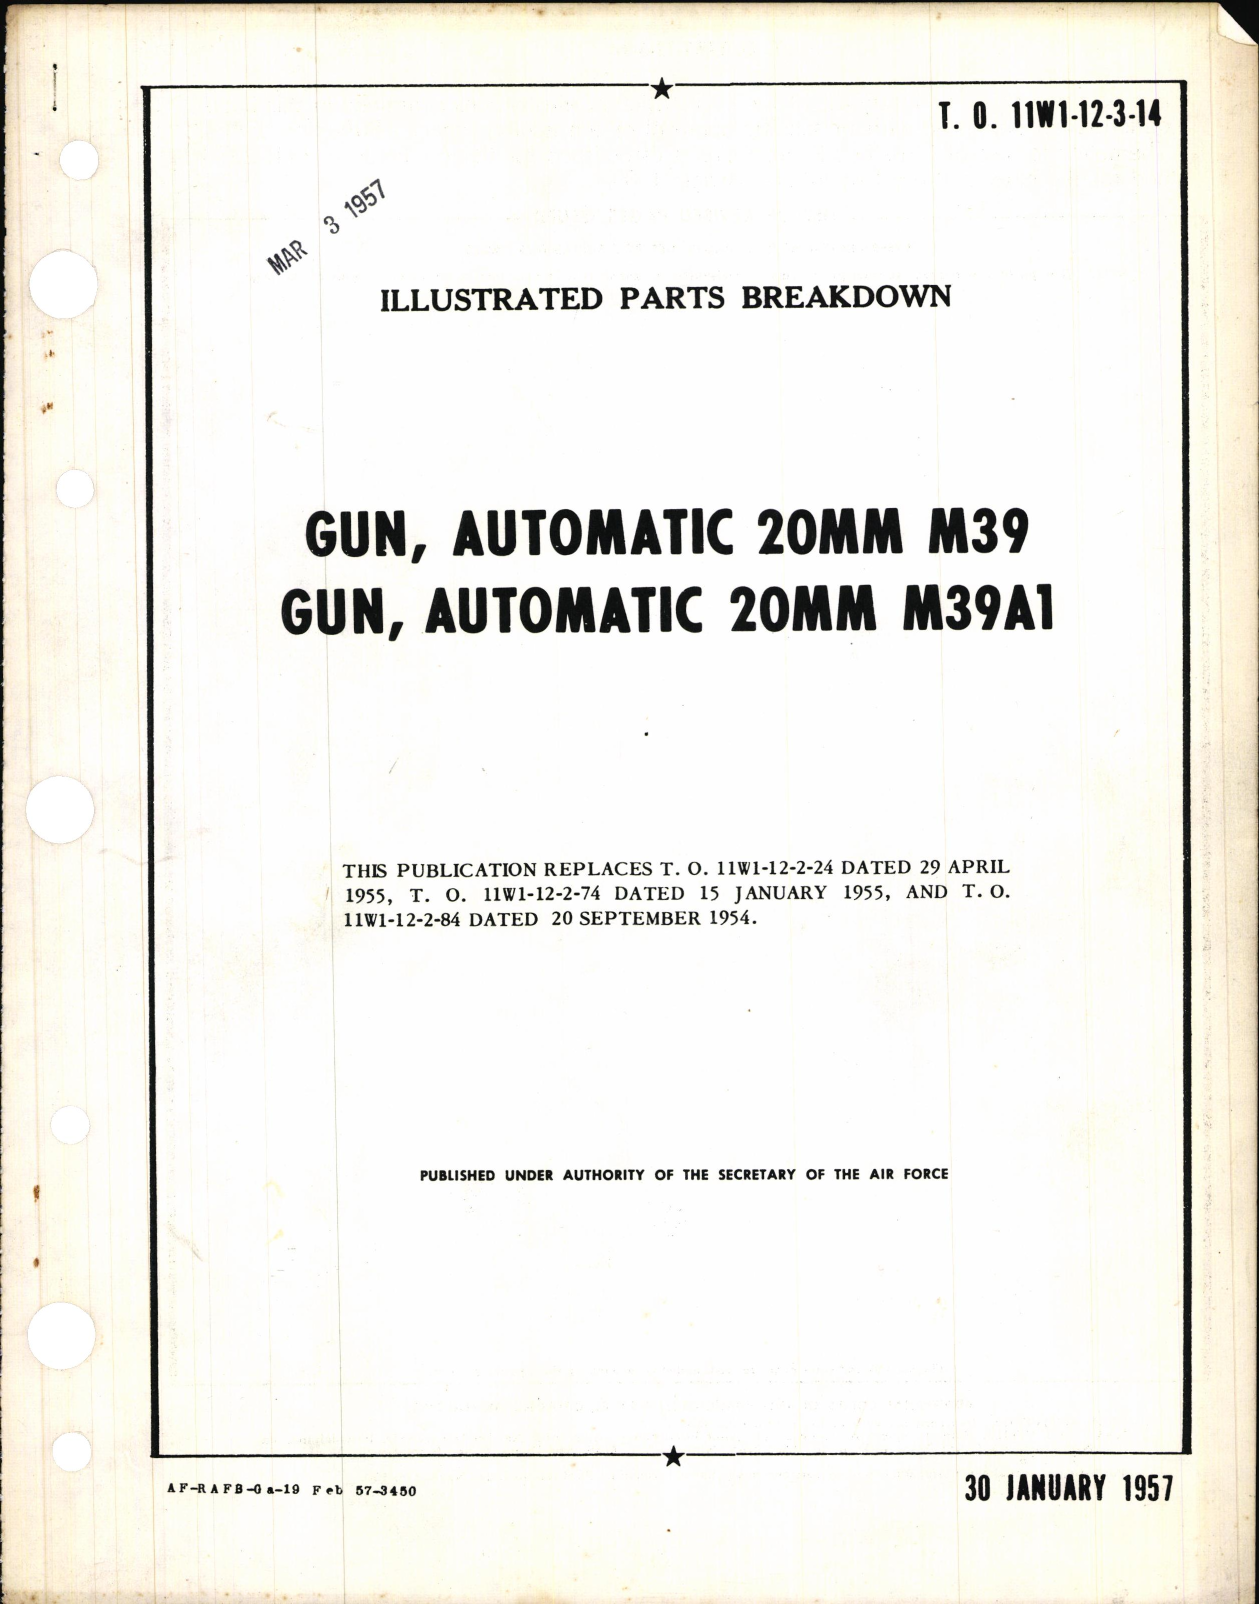 Sample page 1 from AirCorps Library document: Illustrated Parts Breakdown for Automatic Gun 20MM M39 and M39A1